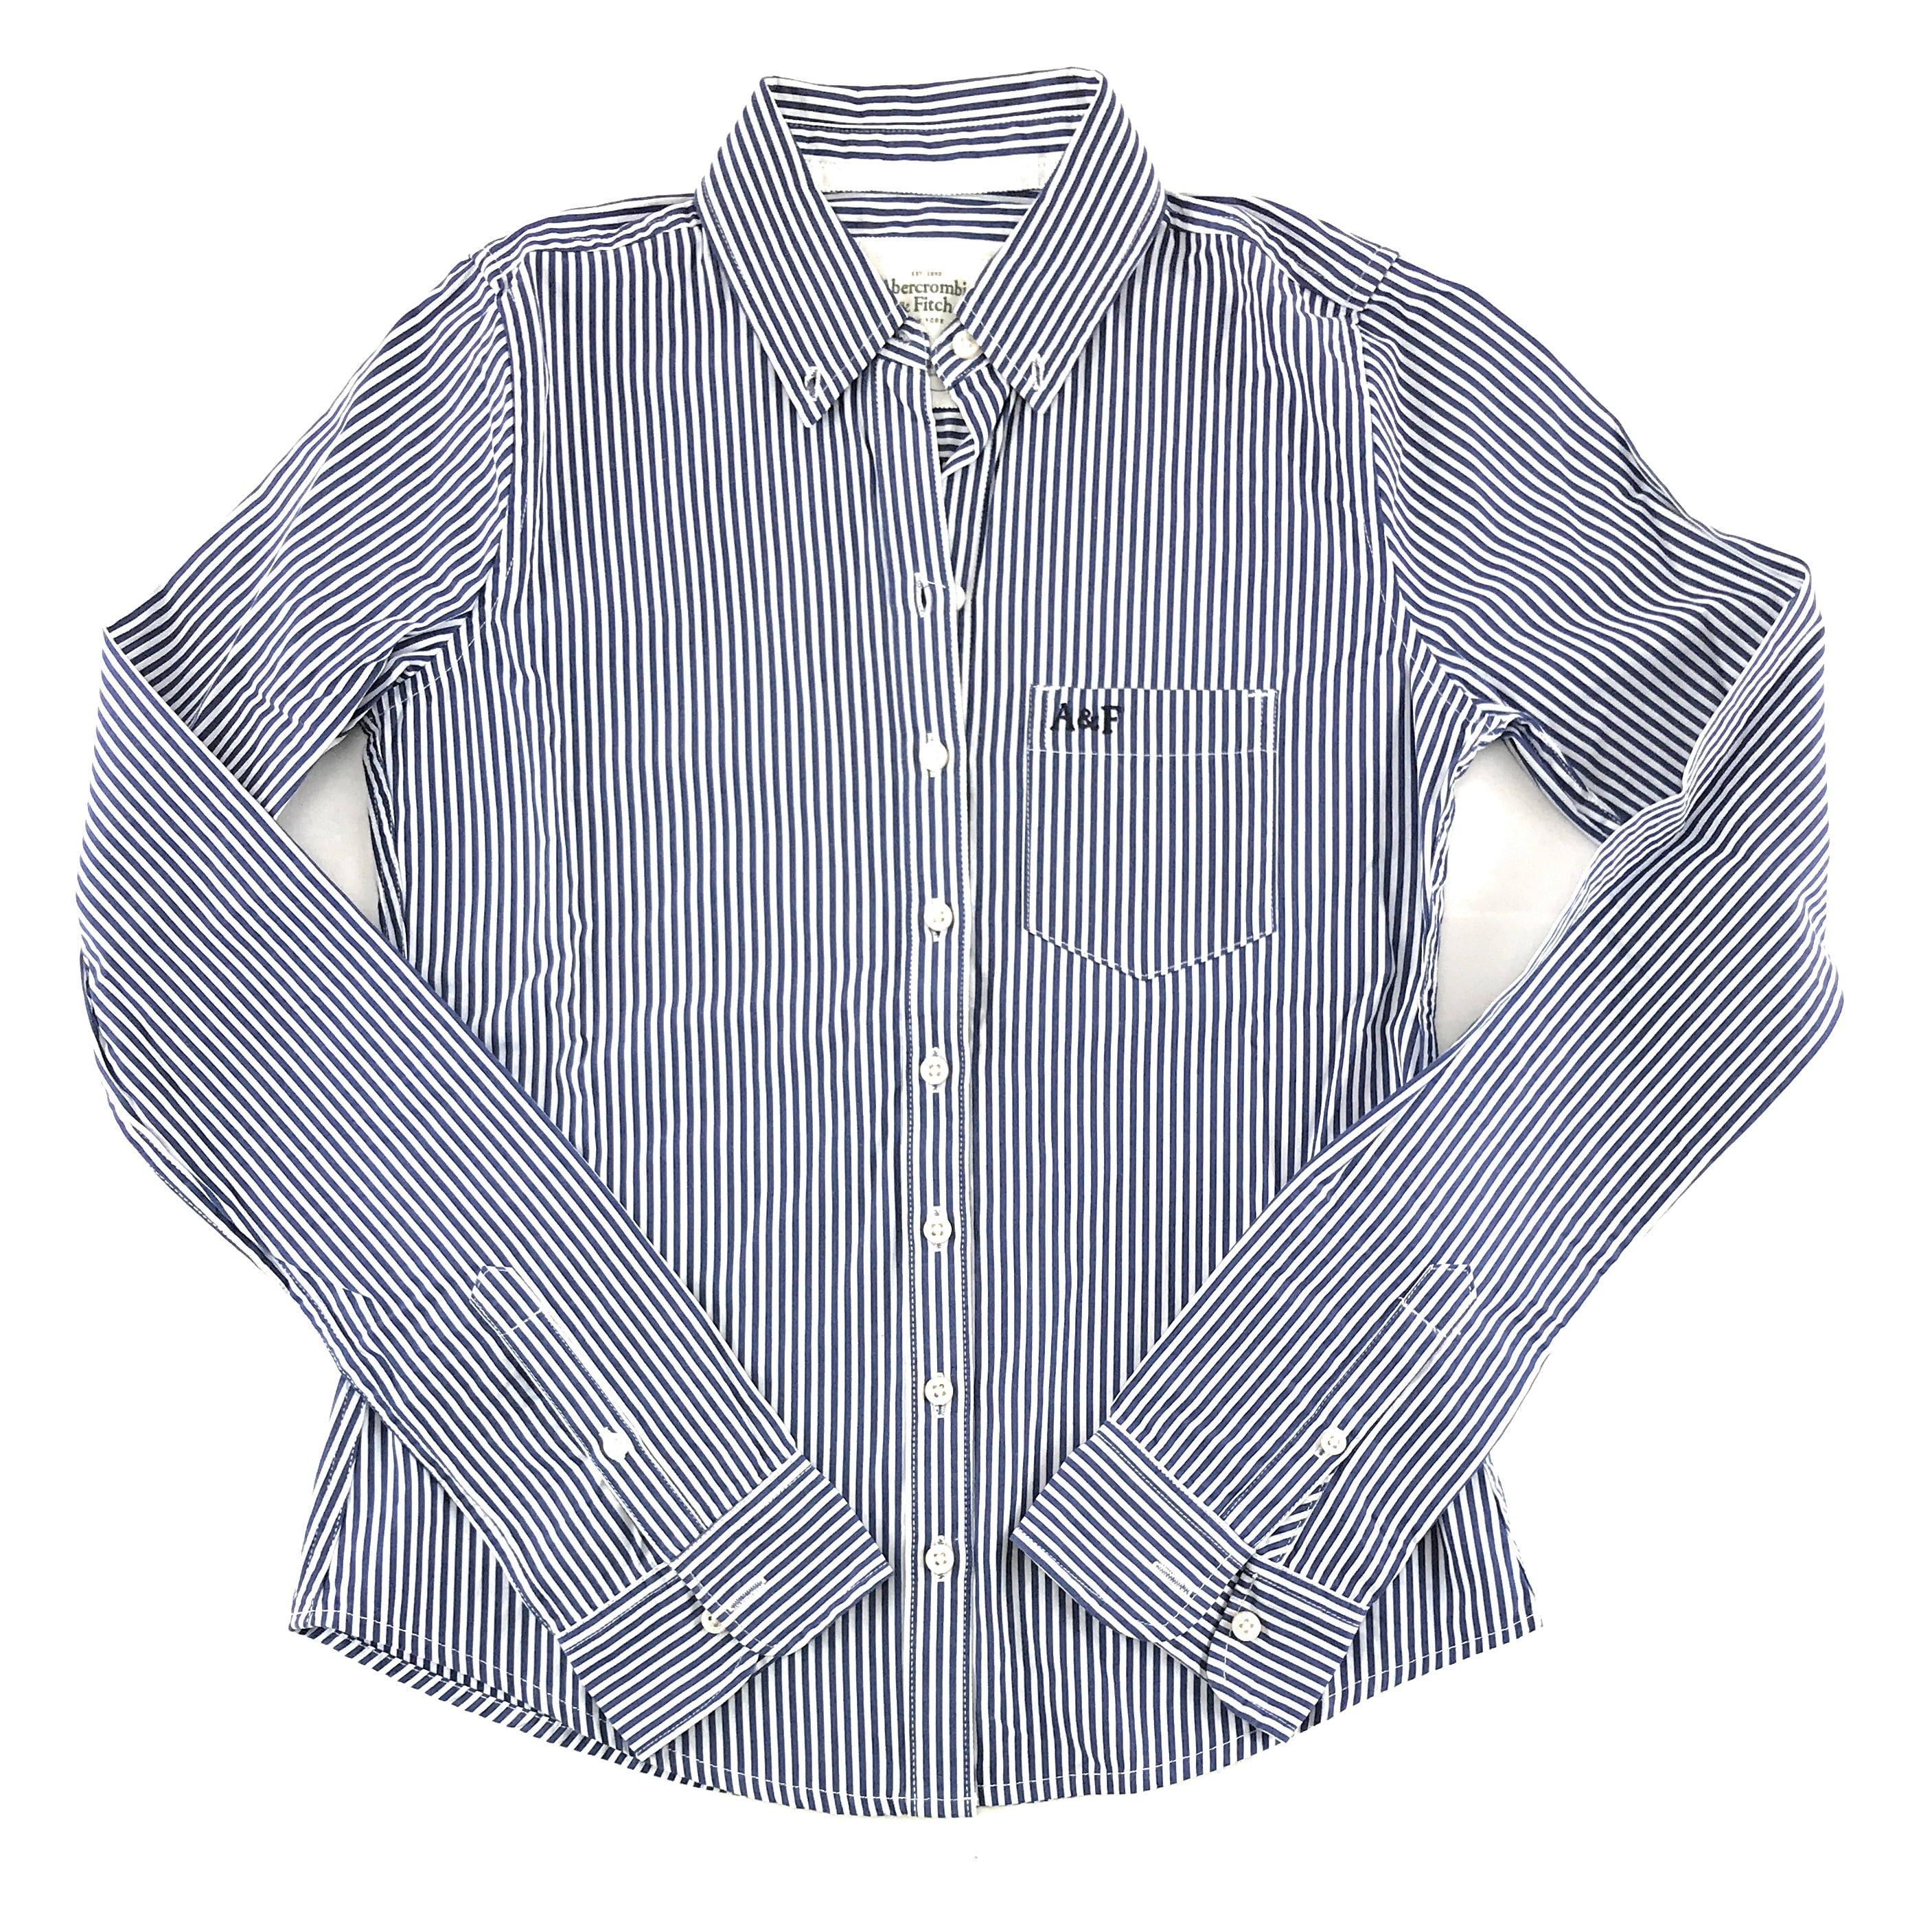 abercrombie and fitch button up shirt